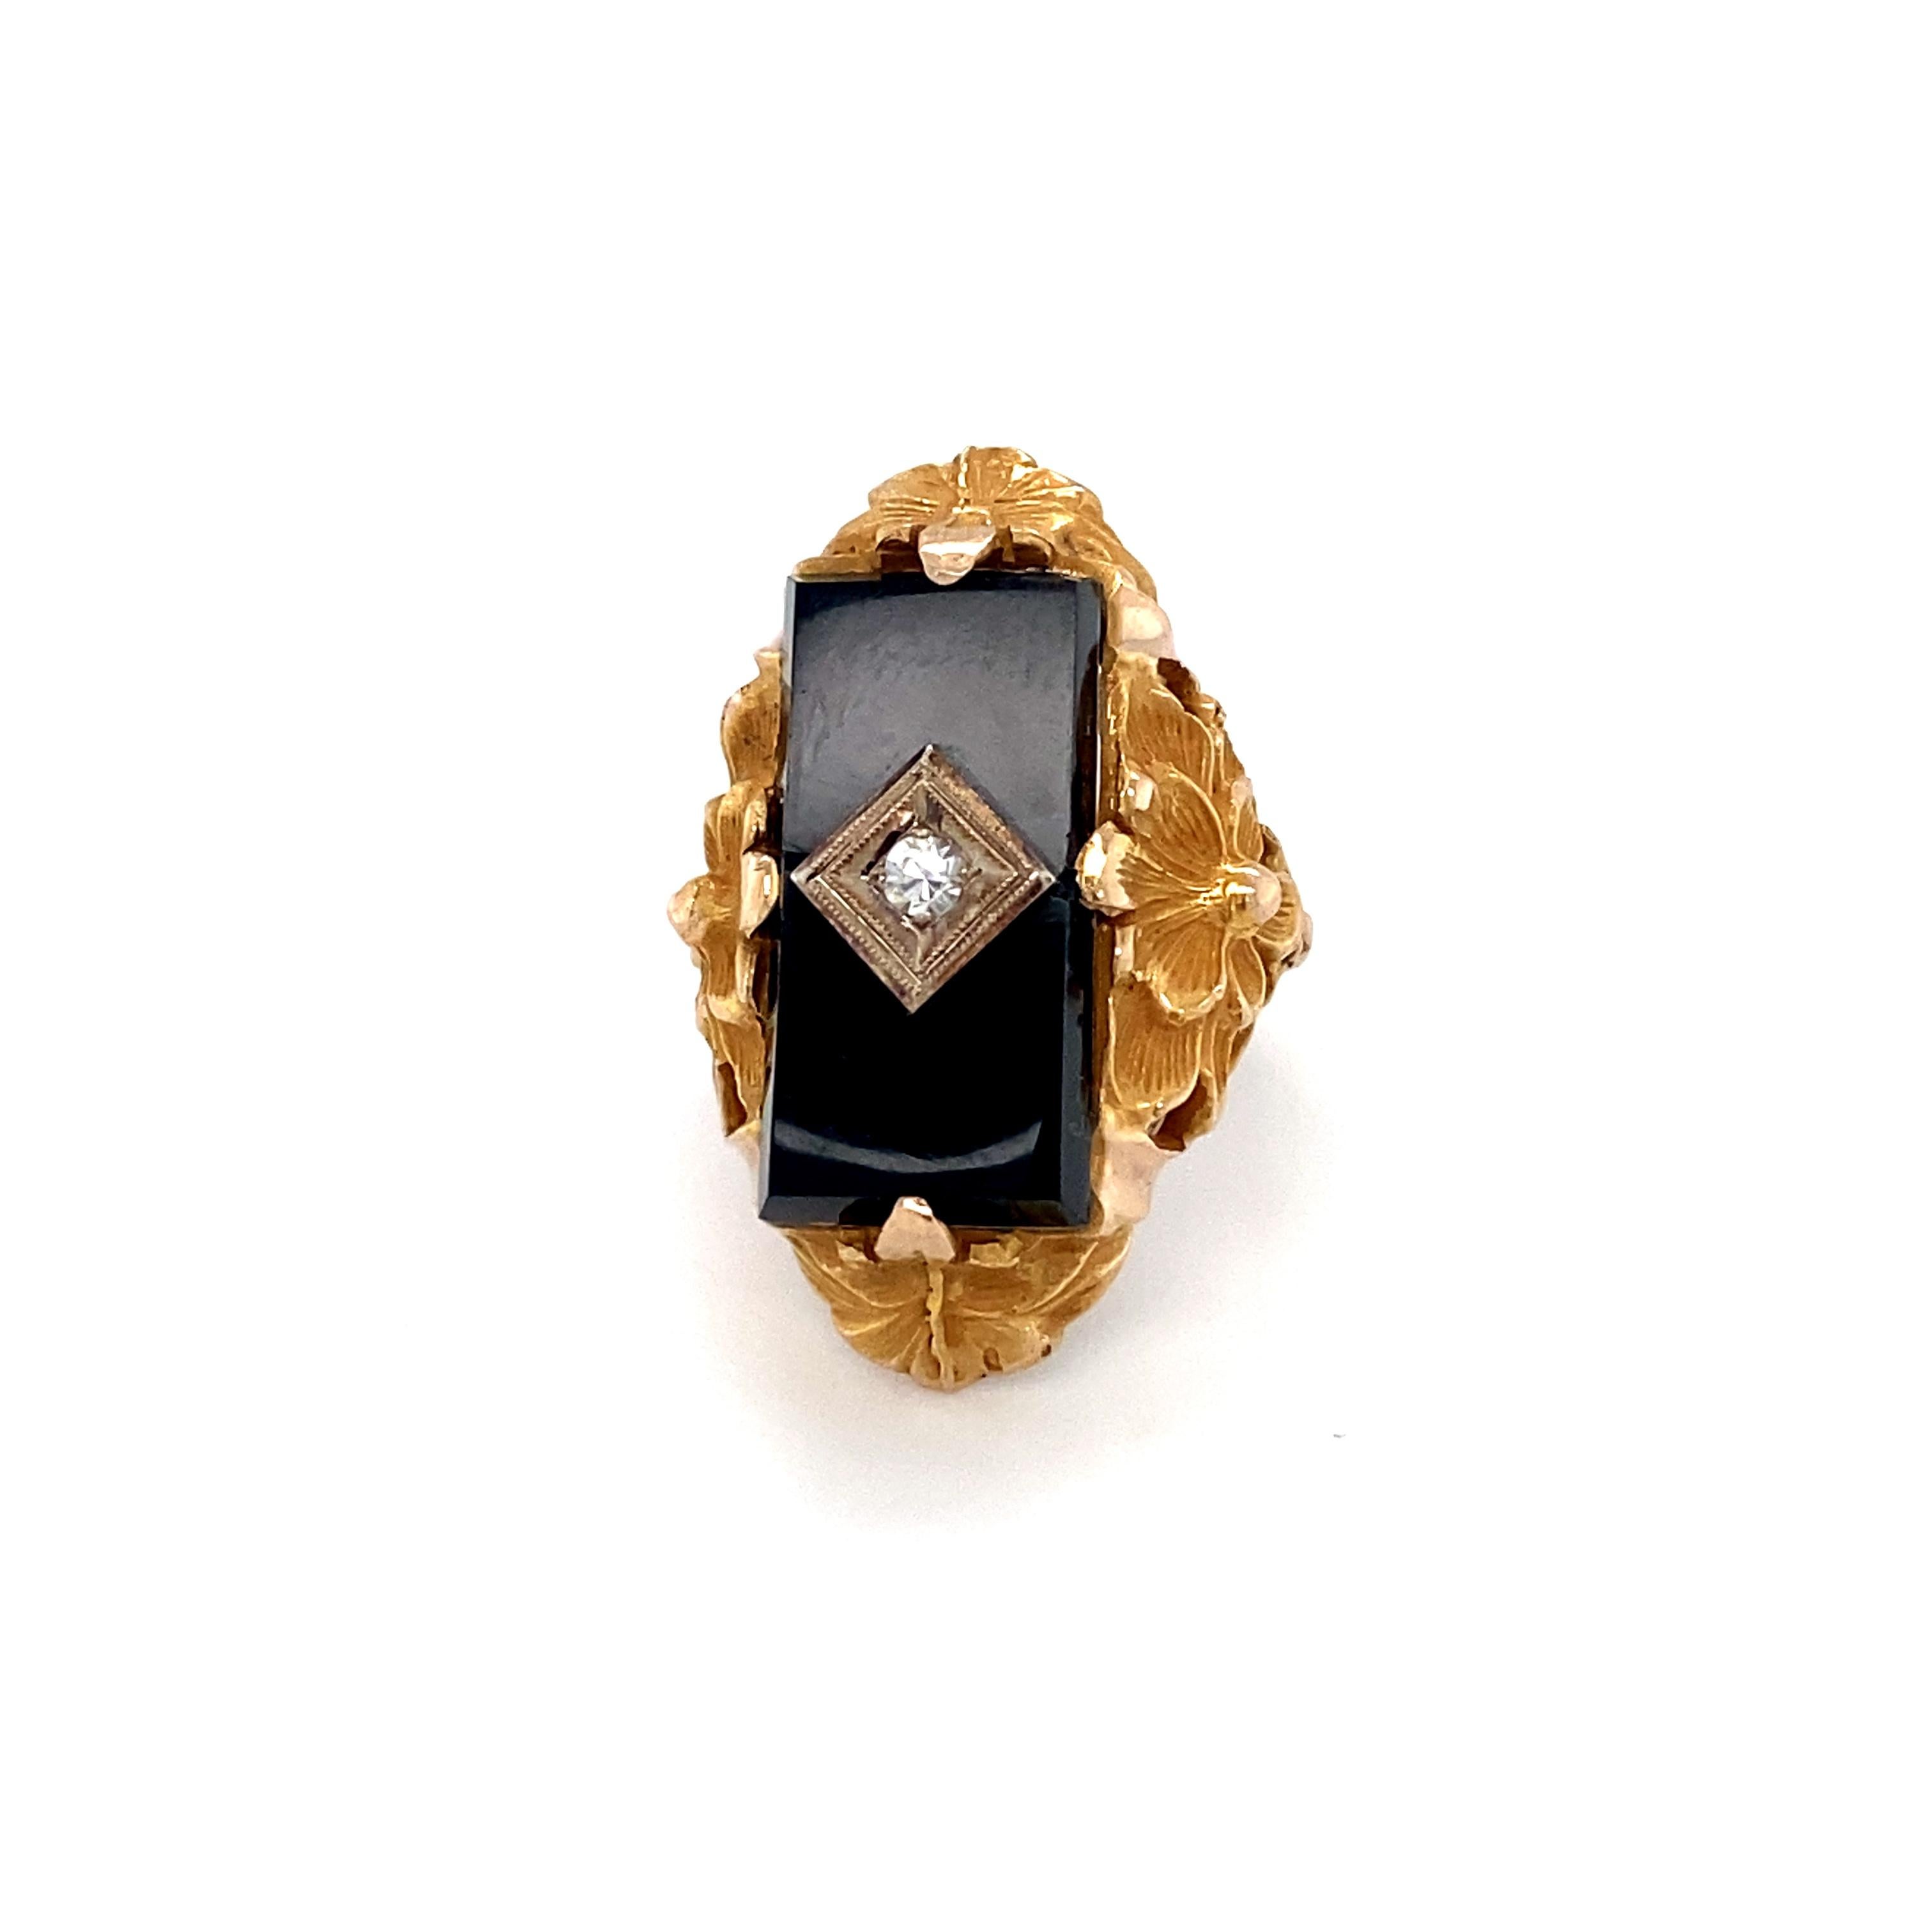 Women's or Men's 1920s Art Deco Onyx and Diamond Floral Ring in 14 Karat Gold